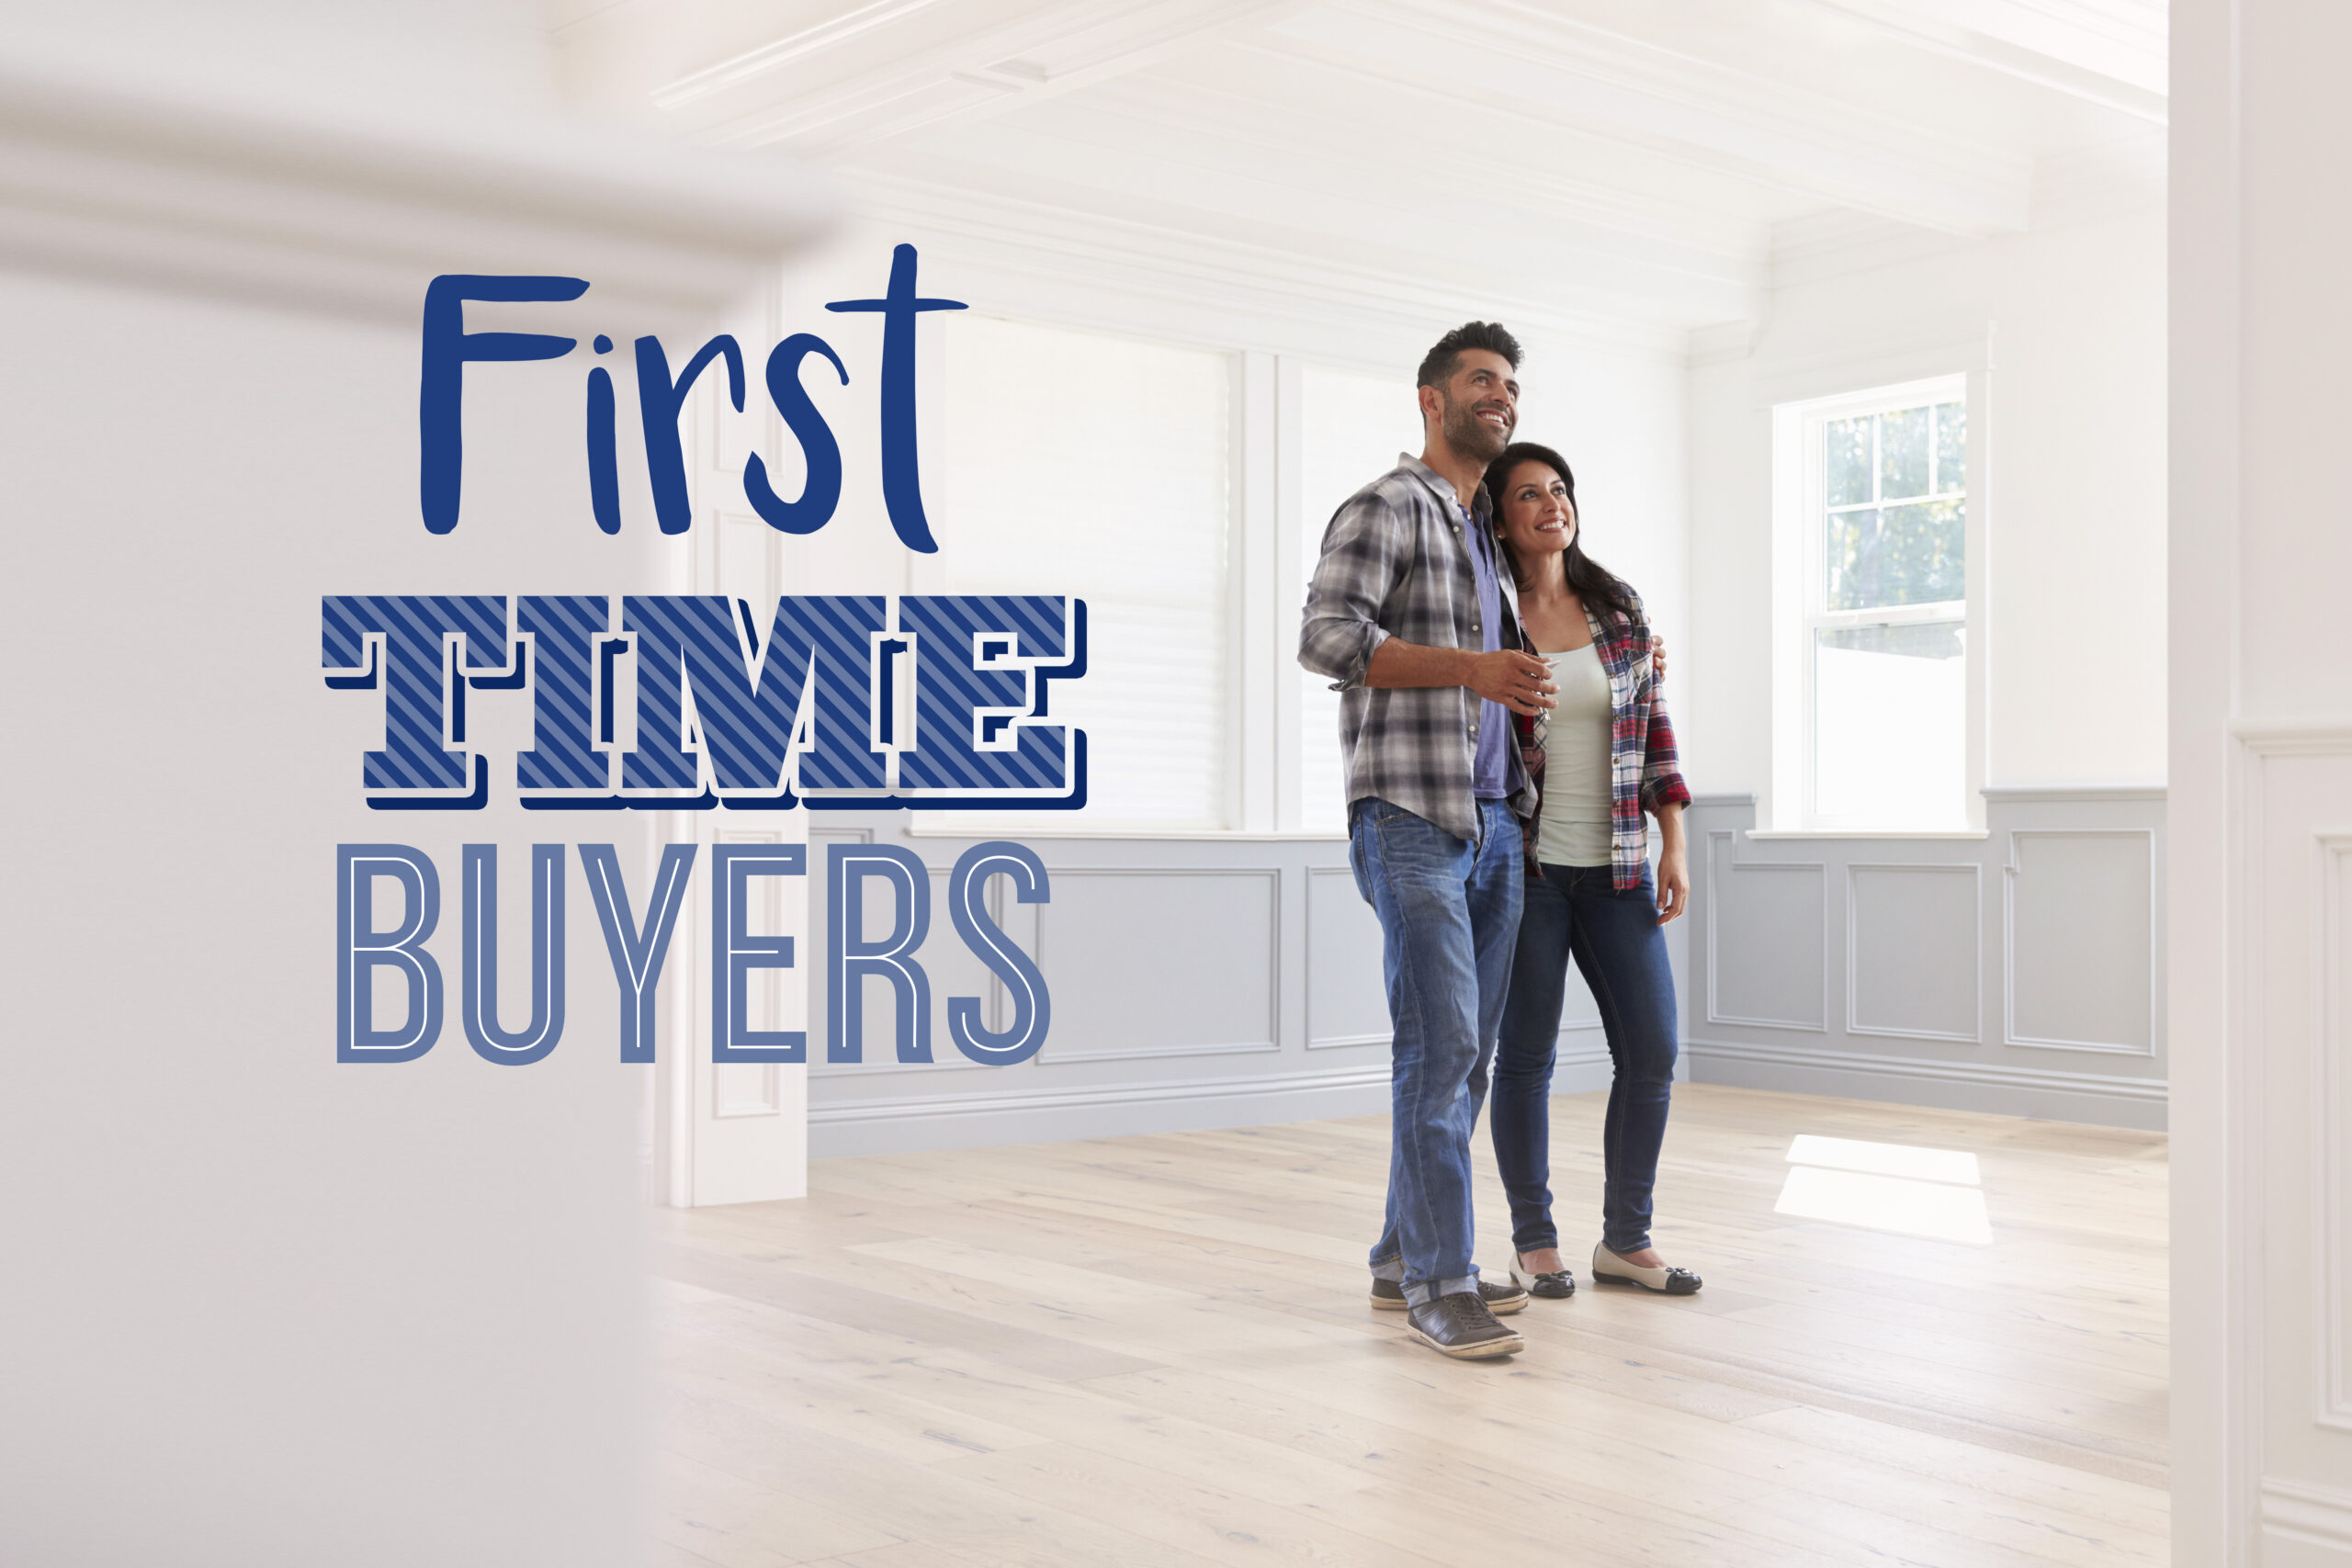 Home owner, homeowner, first time home owner, first time home buyer, home buying, real estate, realtor, real estate professional